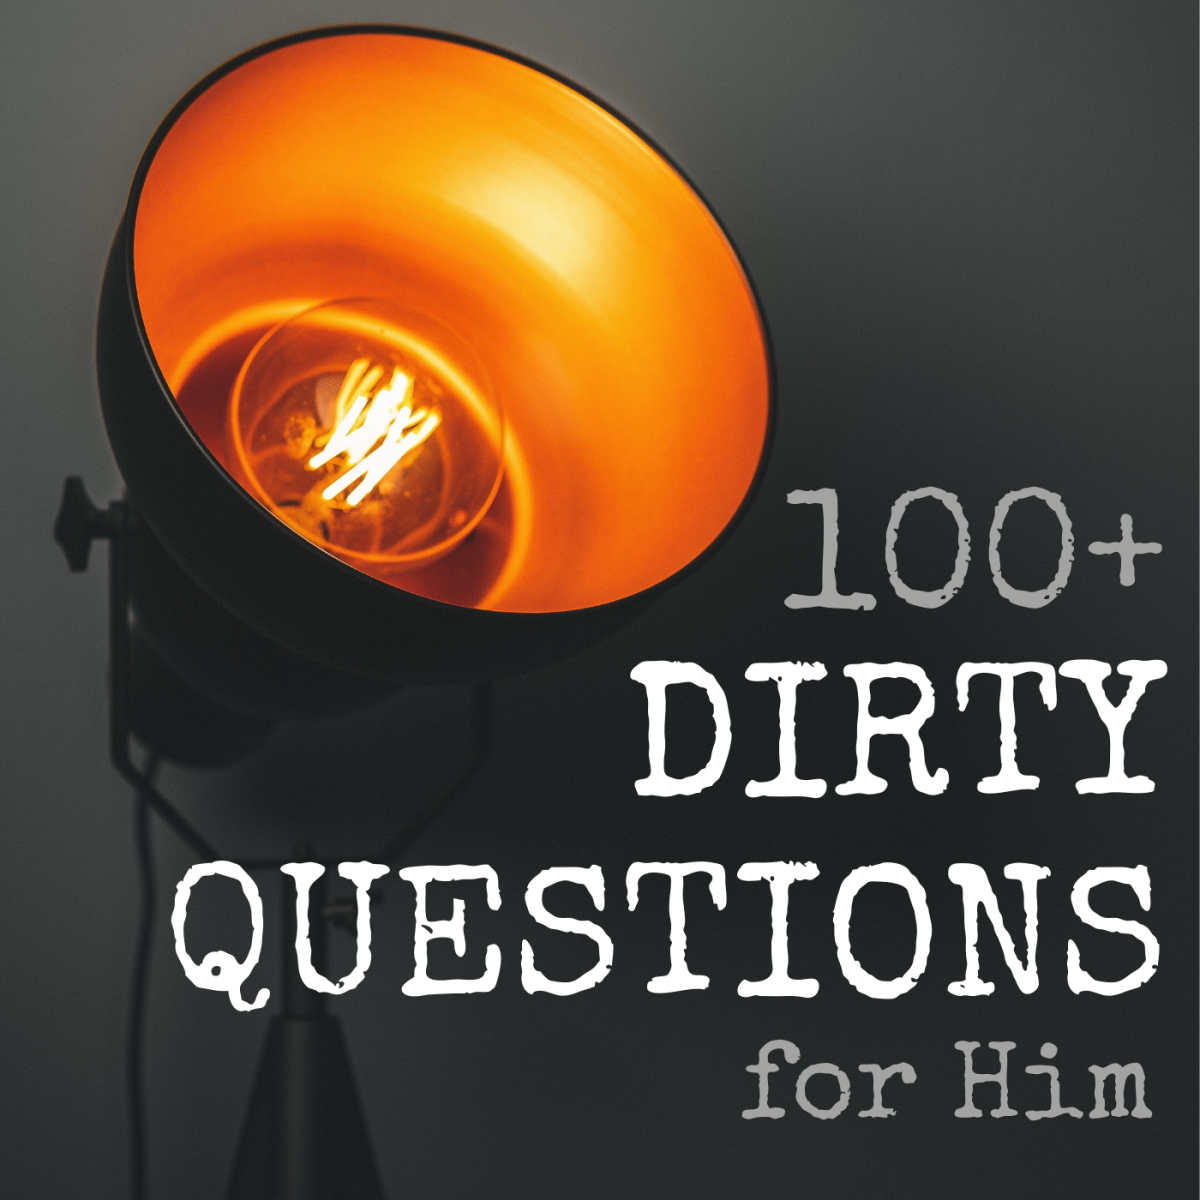 Questions question guy a to game ask 100+ Questions